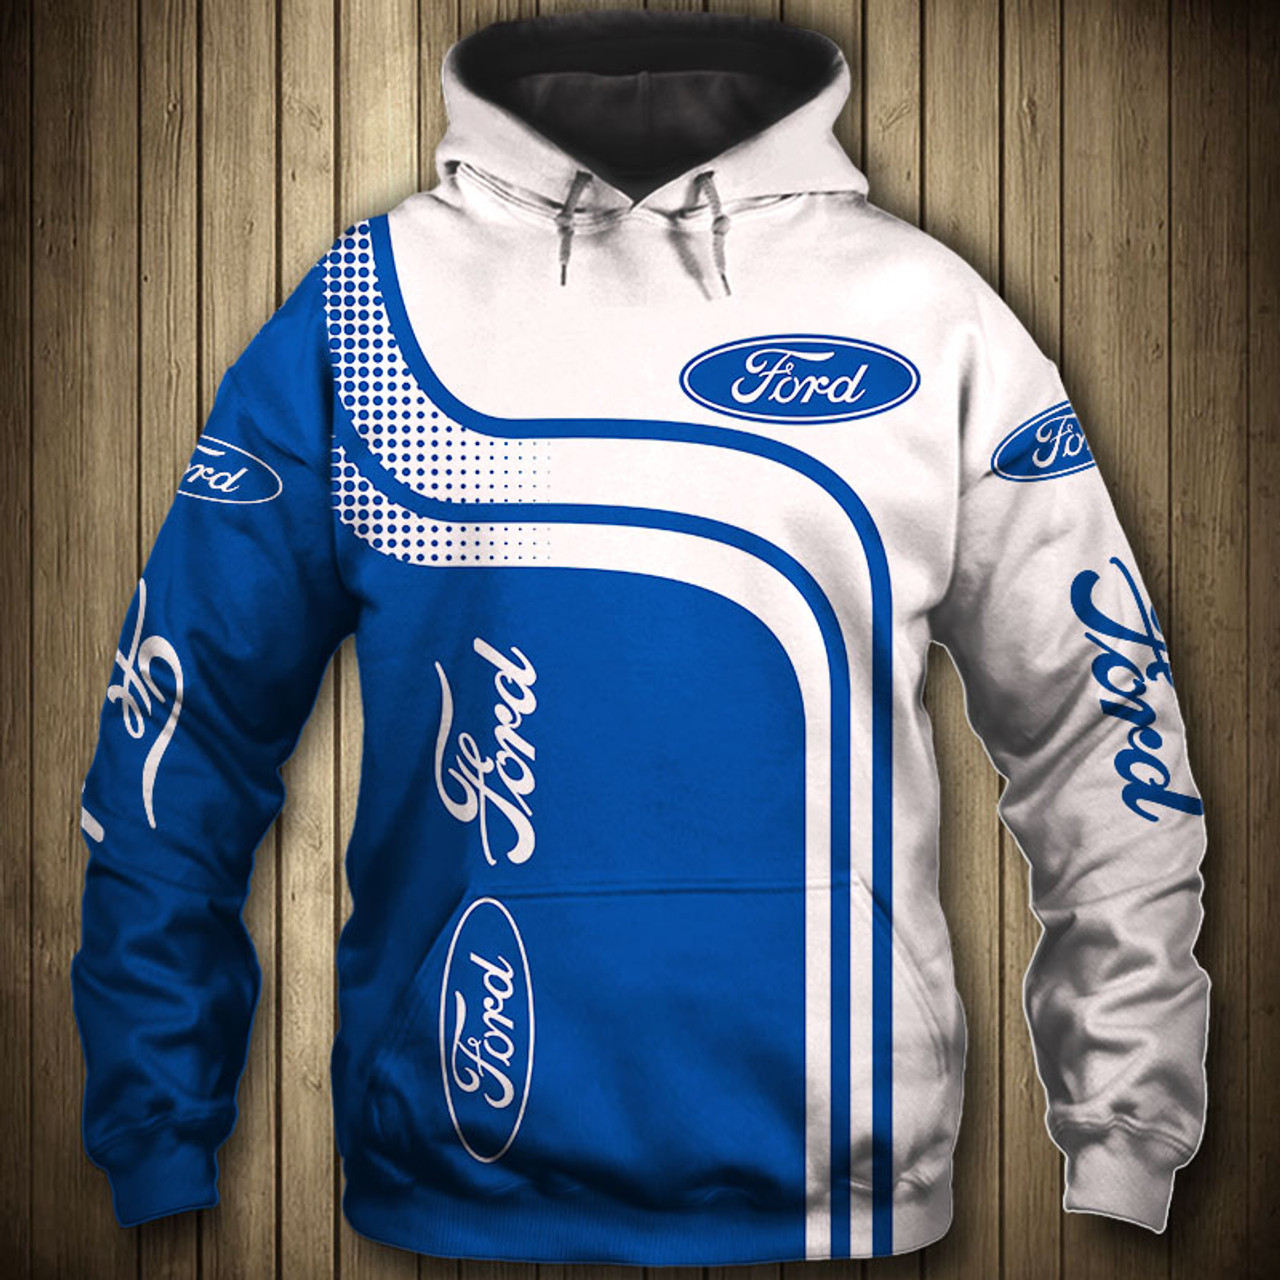  **(OFFICIAL-NEW-FORD-PULLOVER-HOODIES/NICE-CUSTOM-3D-OFFICIAL-FORD-GRAPHIC-LOGOS & OFFICIAL-CLASSIC-FORD-BLUE & WHITE-COLORS/DETAILED-3D-GRAPHIC-PRINTED-DOUBLE-SIDED-ALL-OVER-DESIGN-ITEM/WARM-PREMIUM-TRENDY-FORD-PULLOVER-DEEP-POCKET-HOODIES)** 